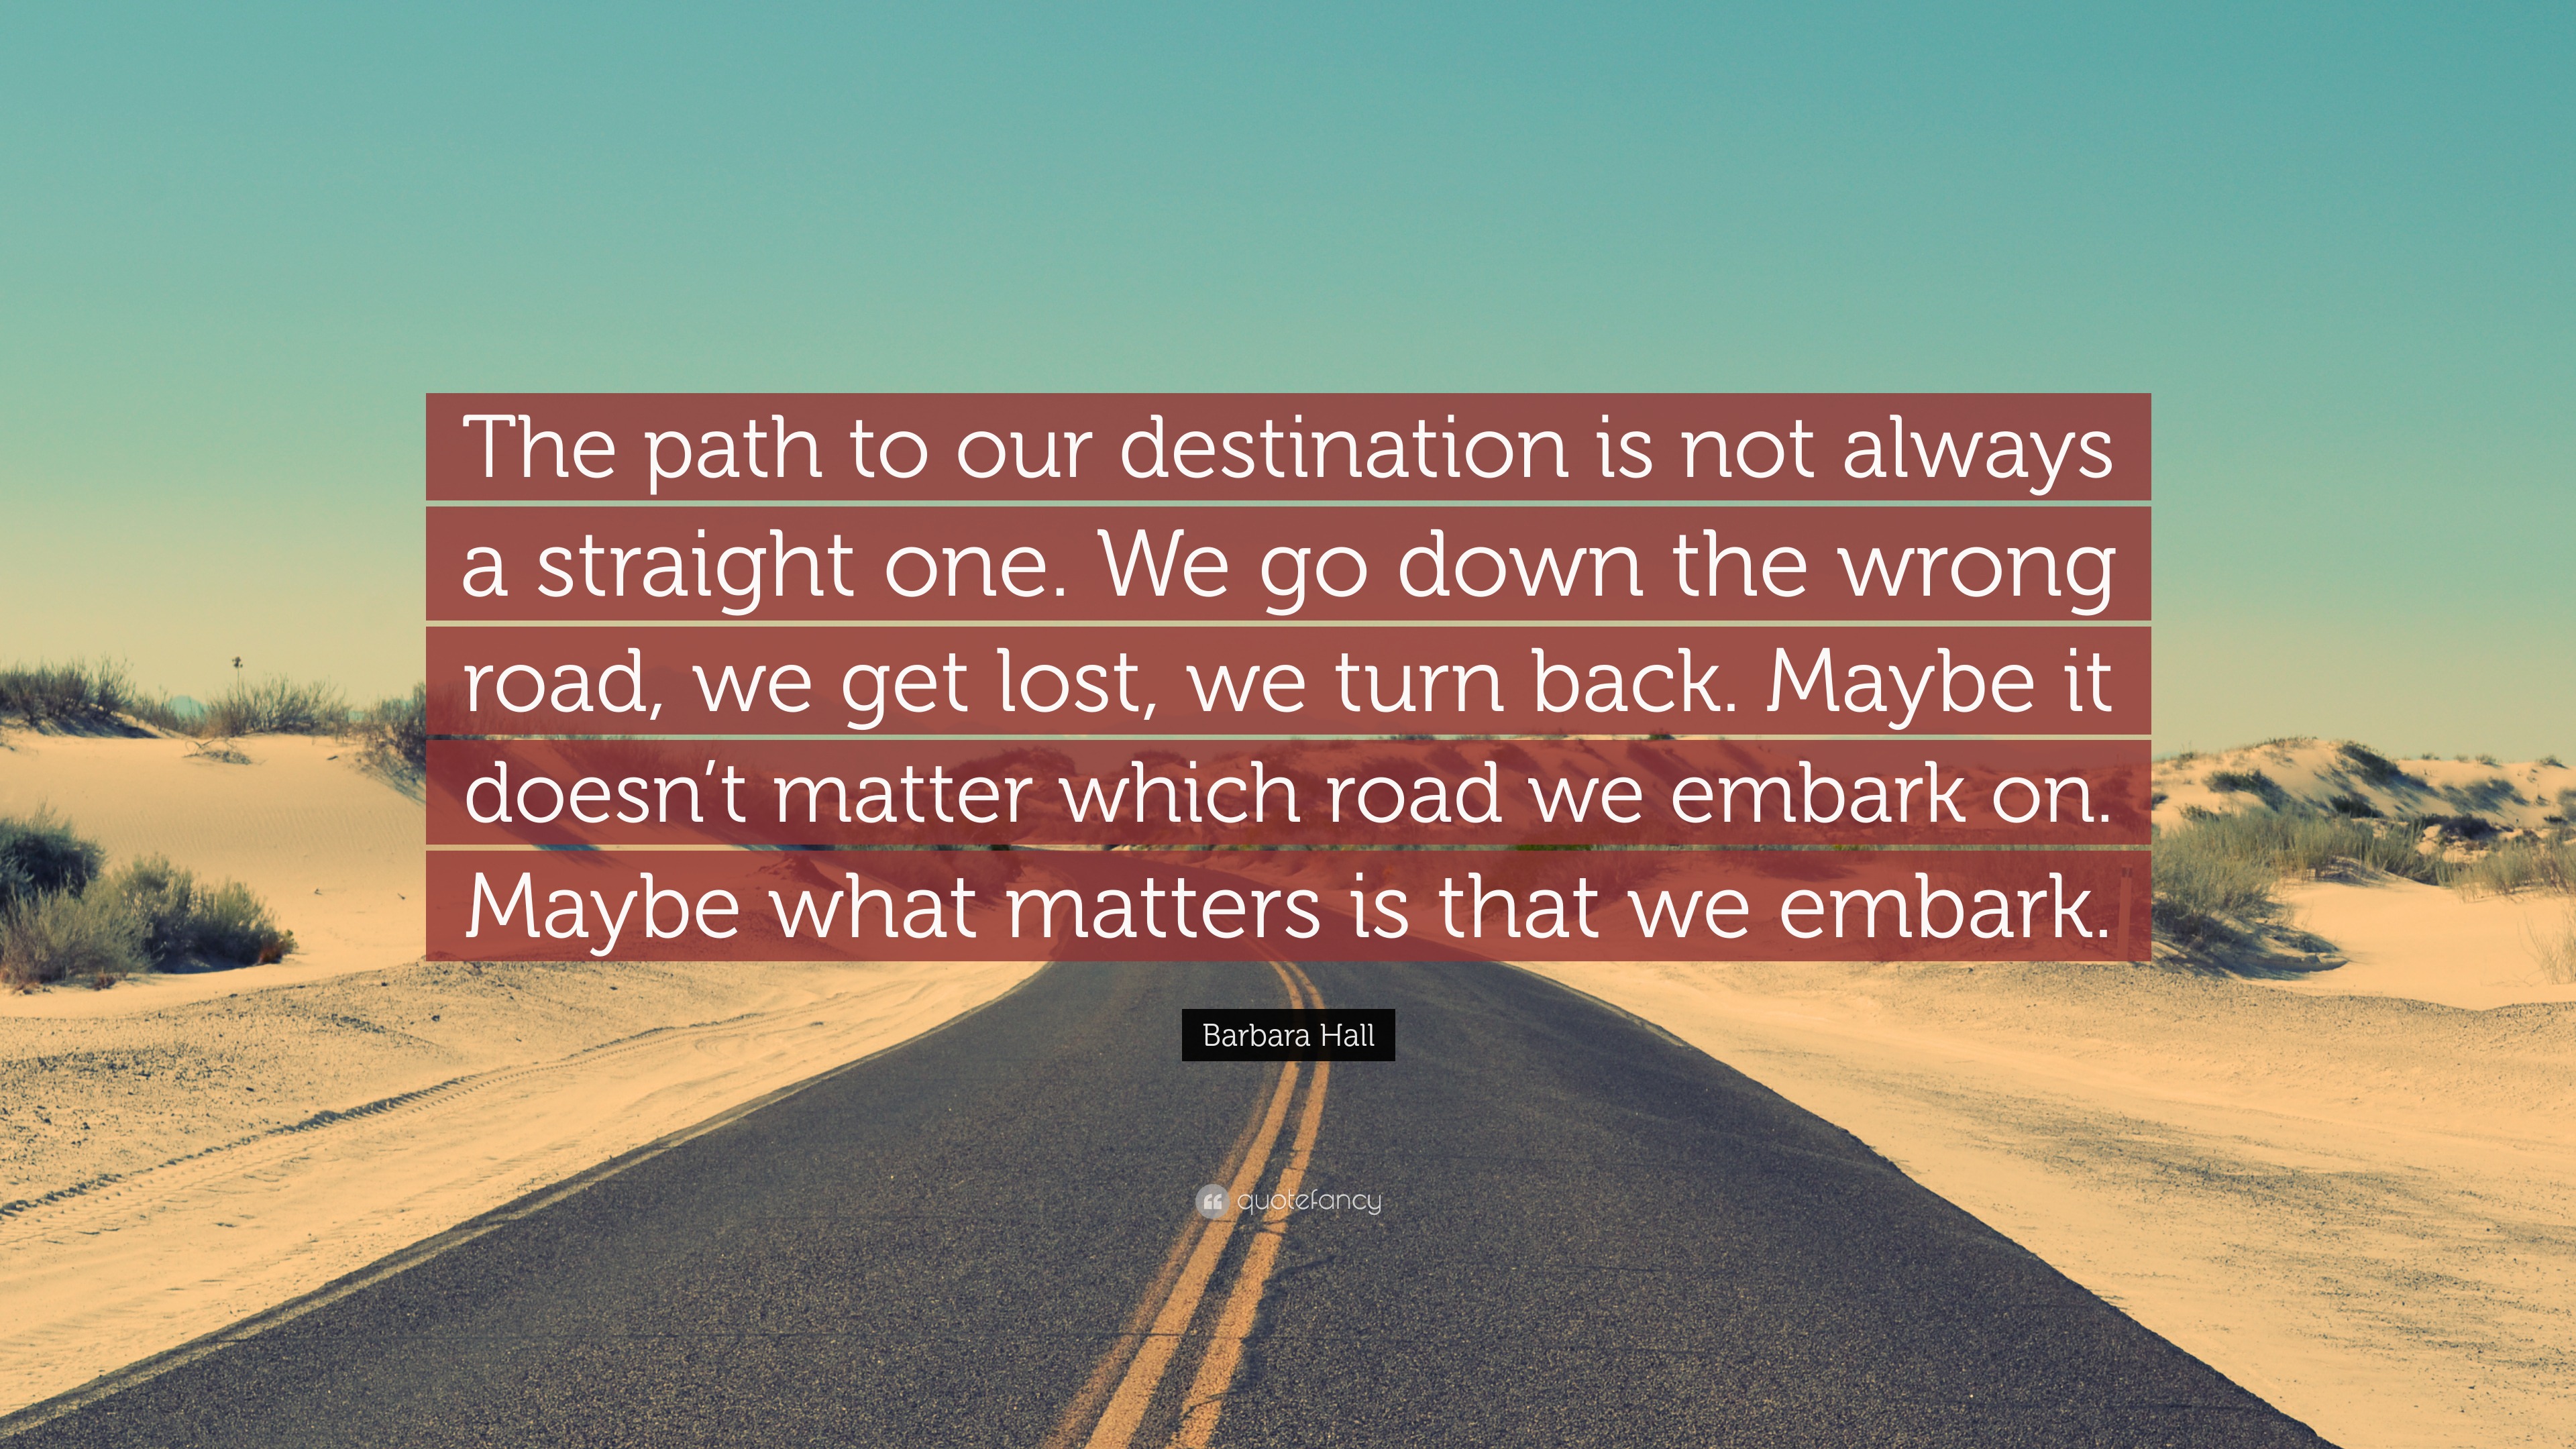 Barbara Hall Quote: “The path to our destination is not always a ...